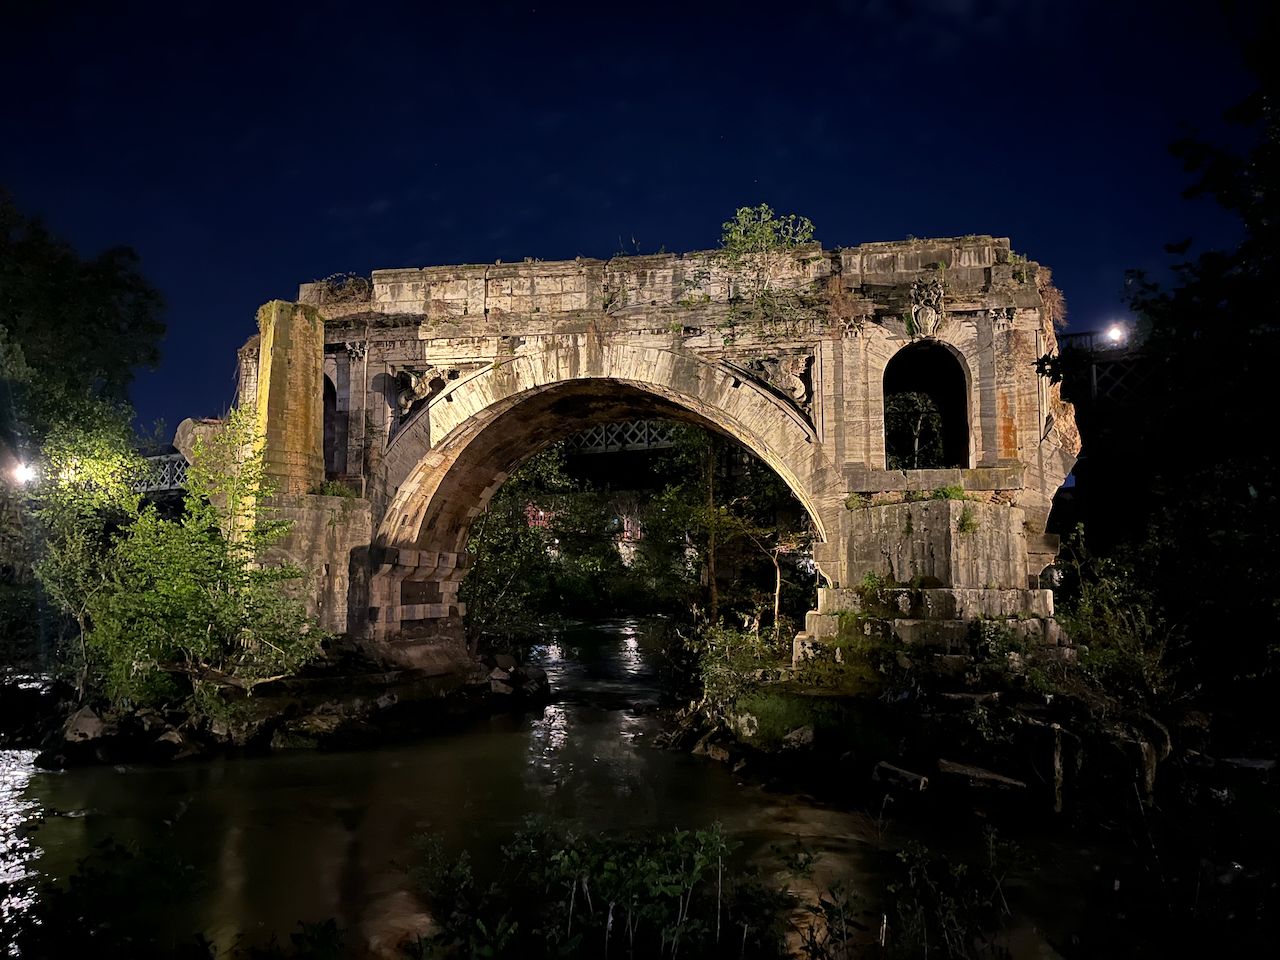 A single arch of a stone bridge is lit in the foreground, pictured from the side and below. The stone is greyed by rain and sediment, there's vegatation hiding the sides. The water passes under and around it. The night sky behind it is dark blue.